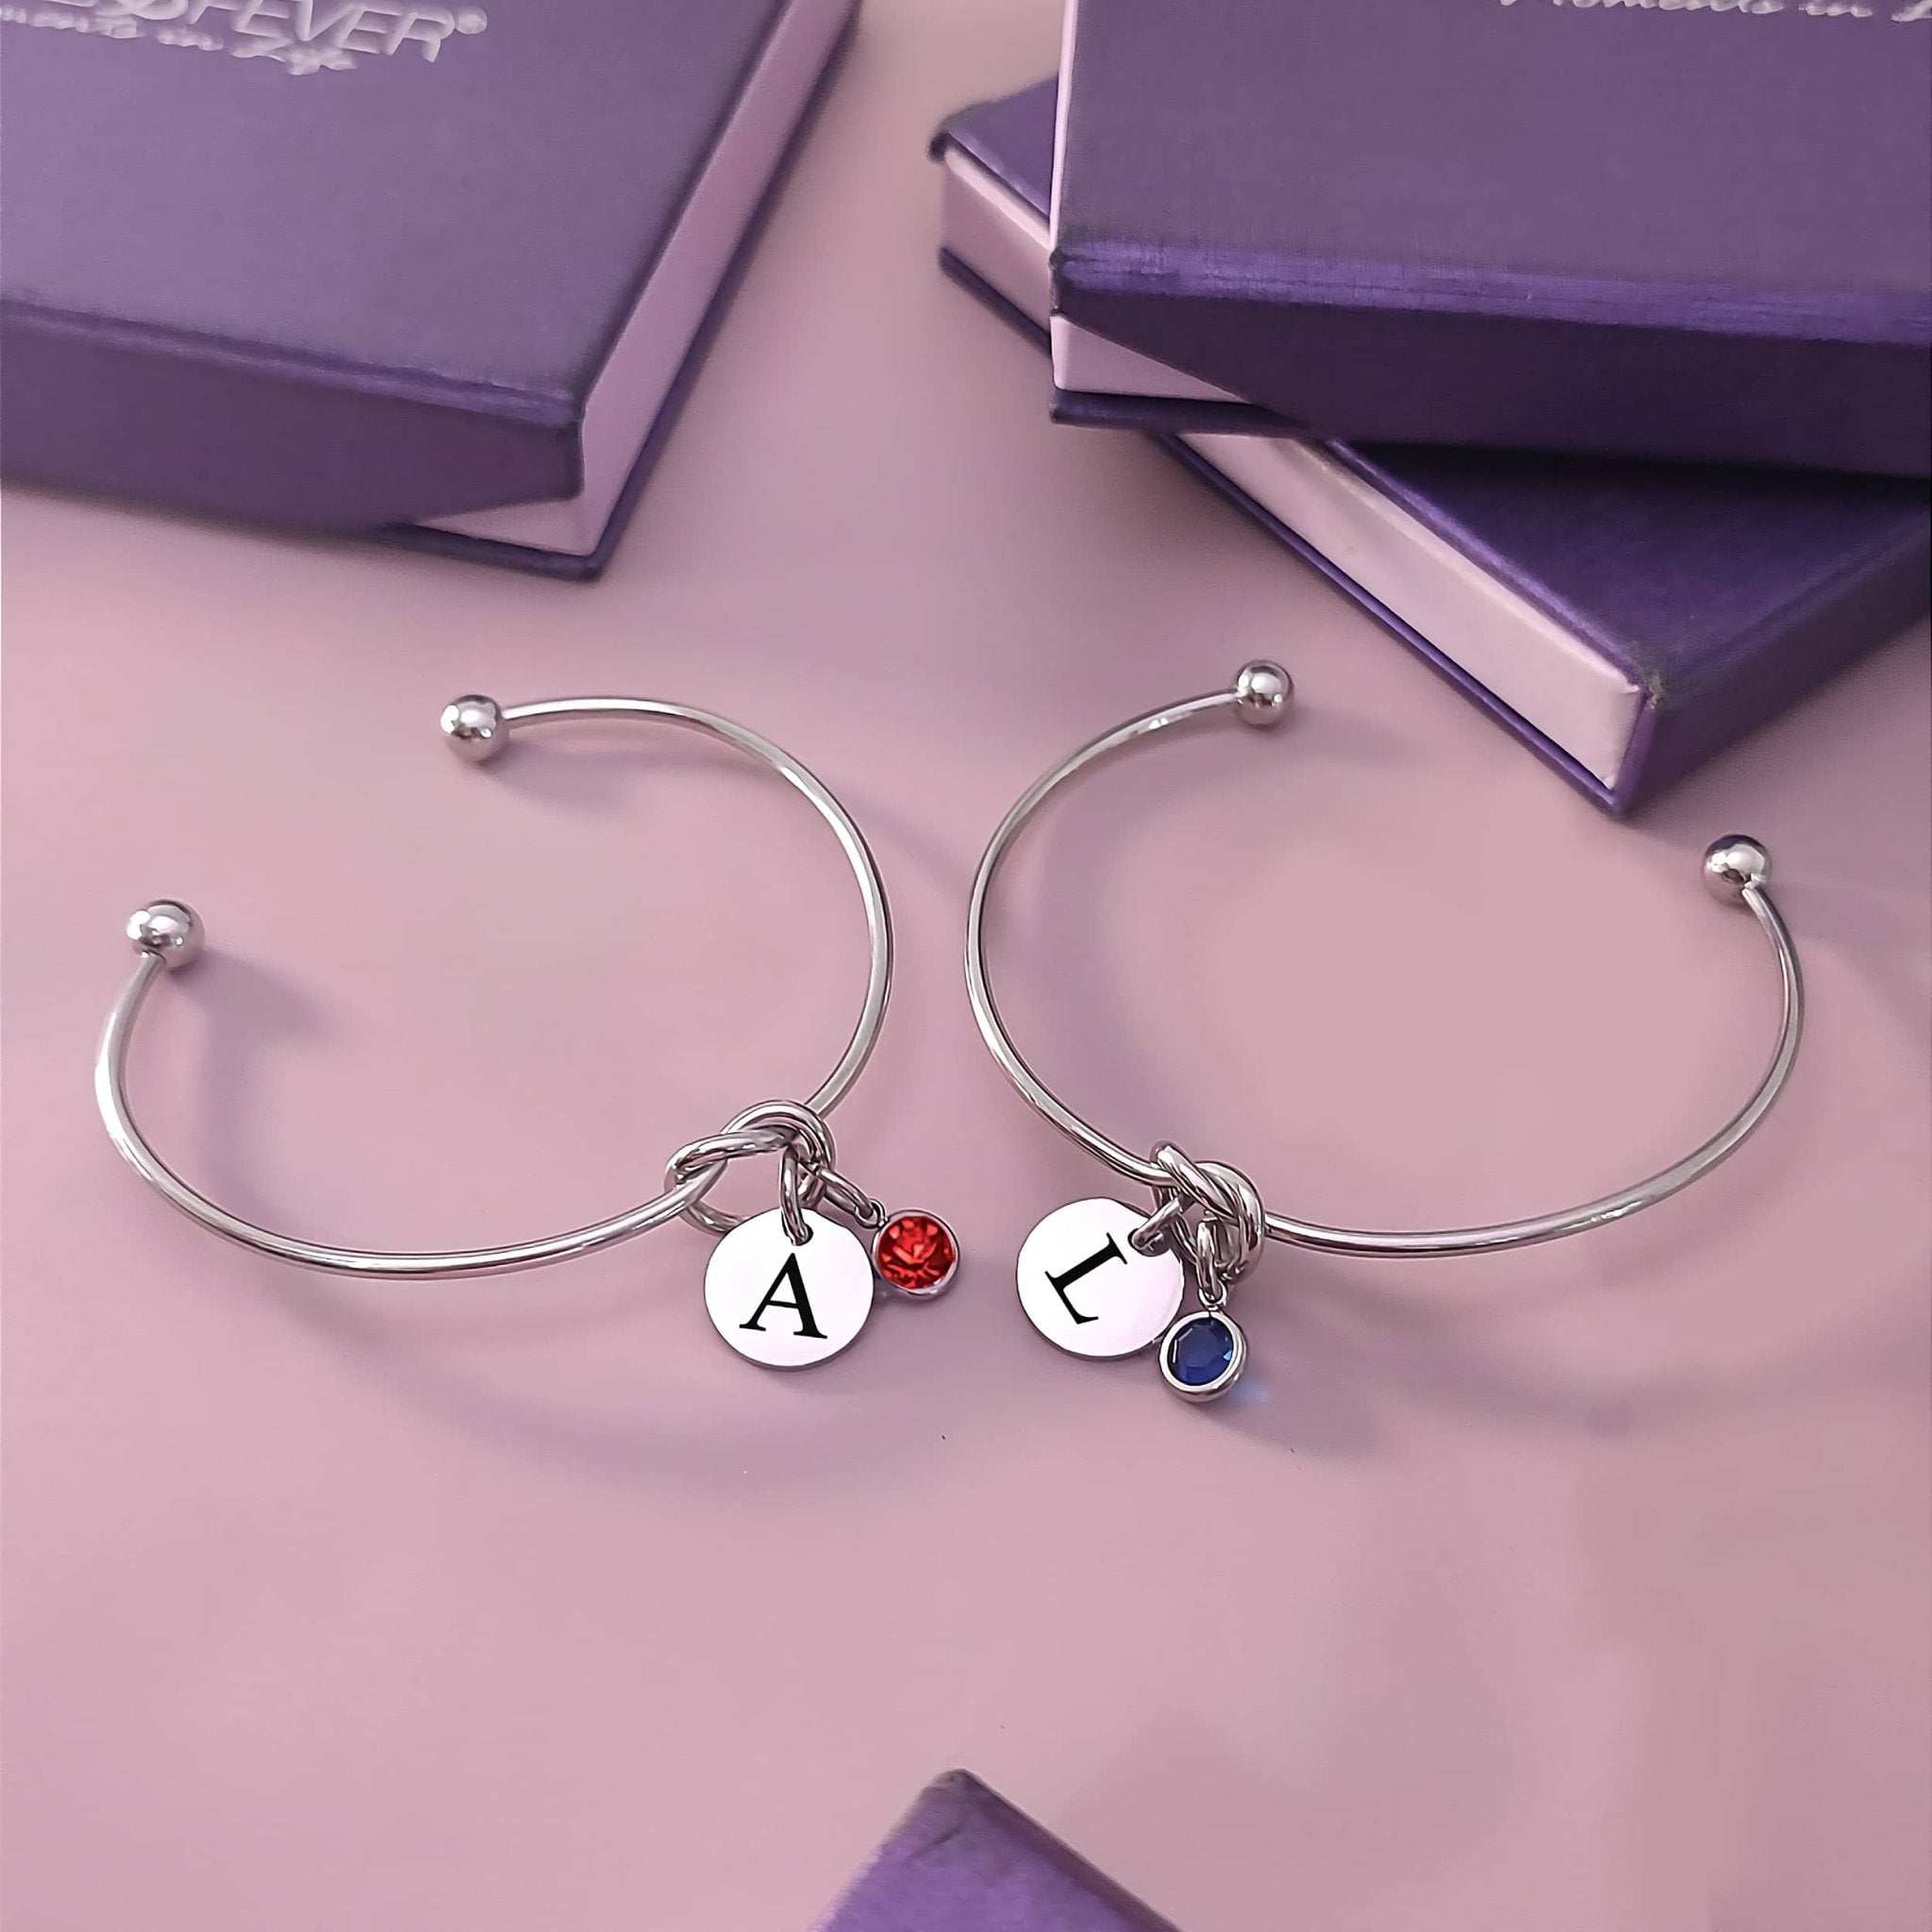 BUY ONE GET ONE Knot Bangle with Disc Charm & Birthstone - Deal